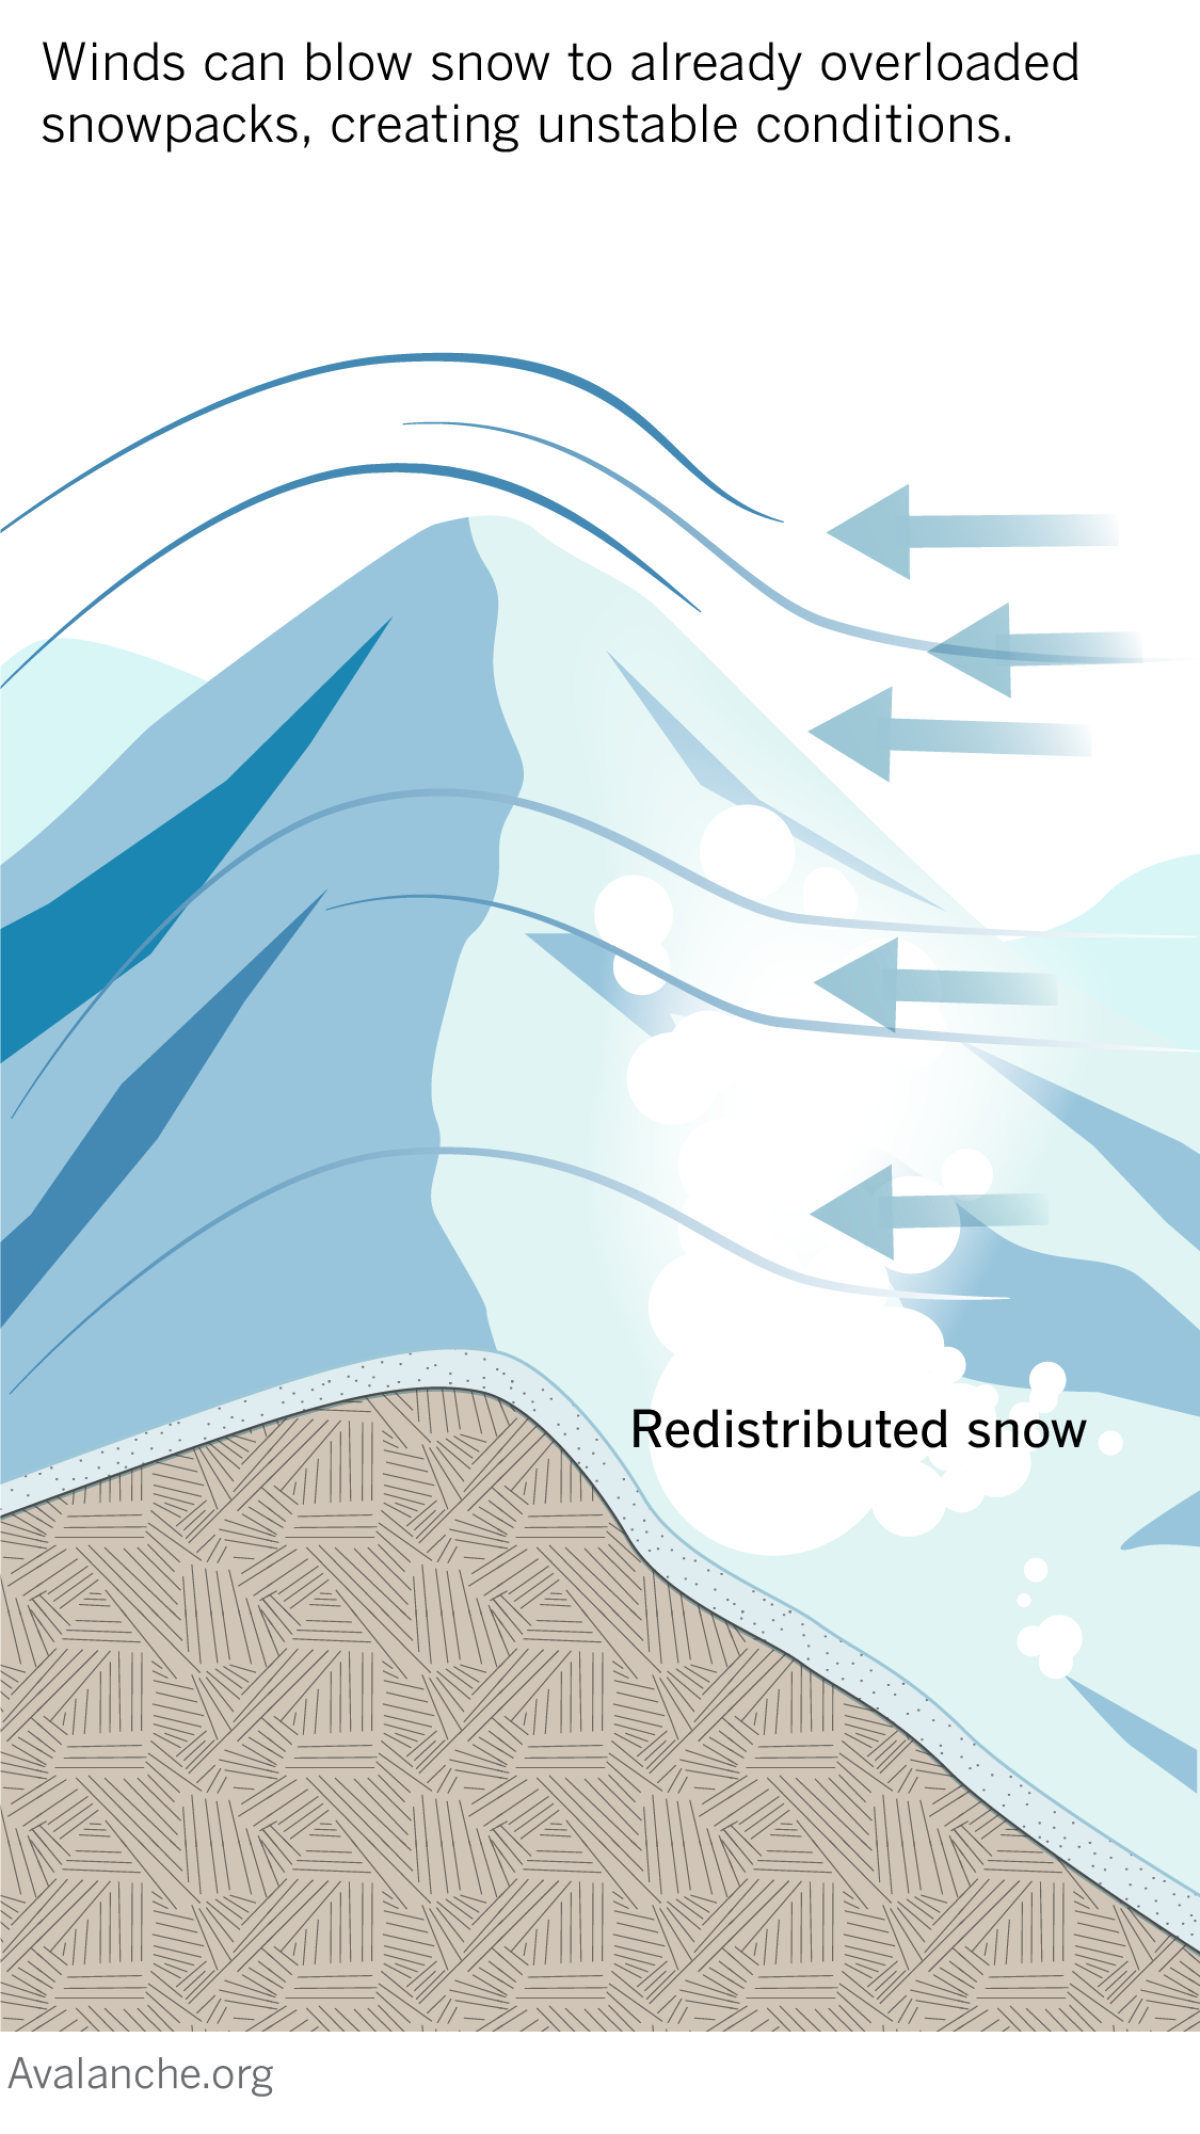 Diagram shows winds can blow snow to already overloaded snowpacks, creating unstable conditions.